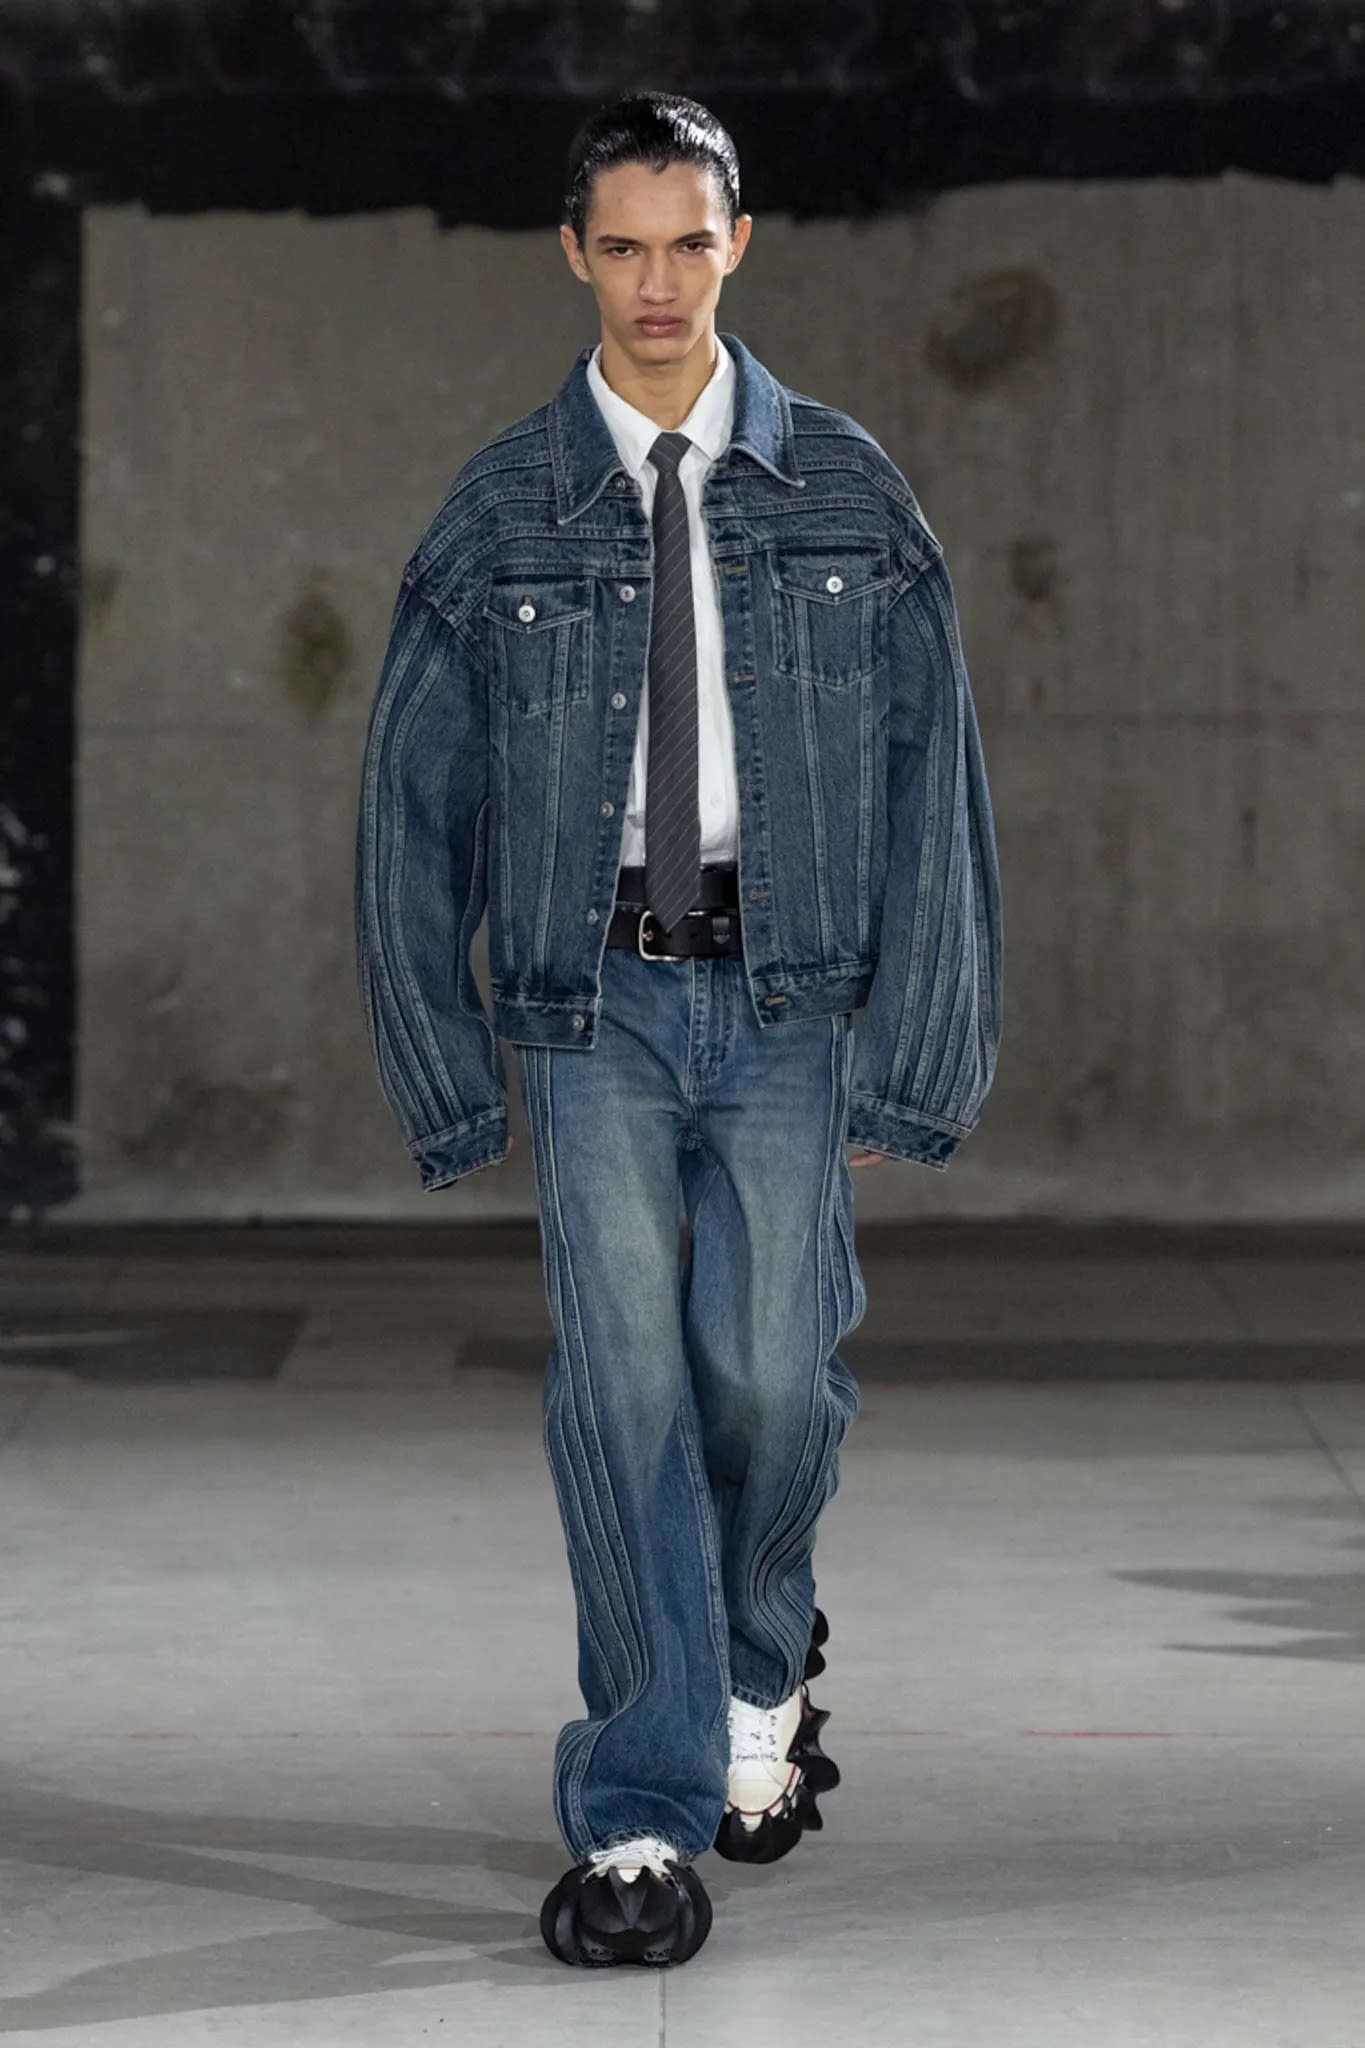 Business Class: Denim Suits Trend on the Runway